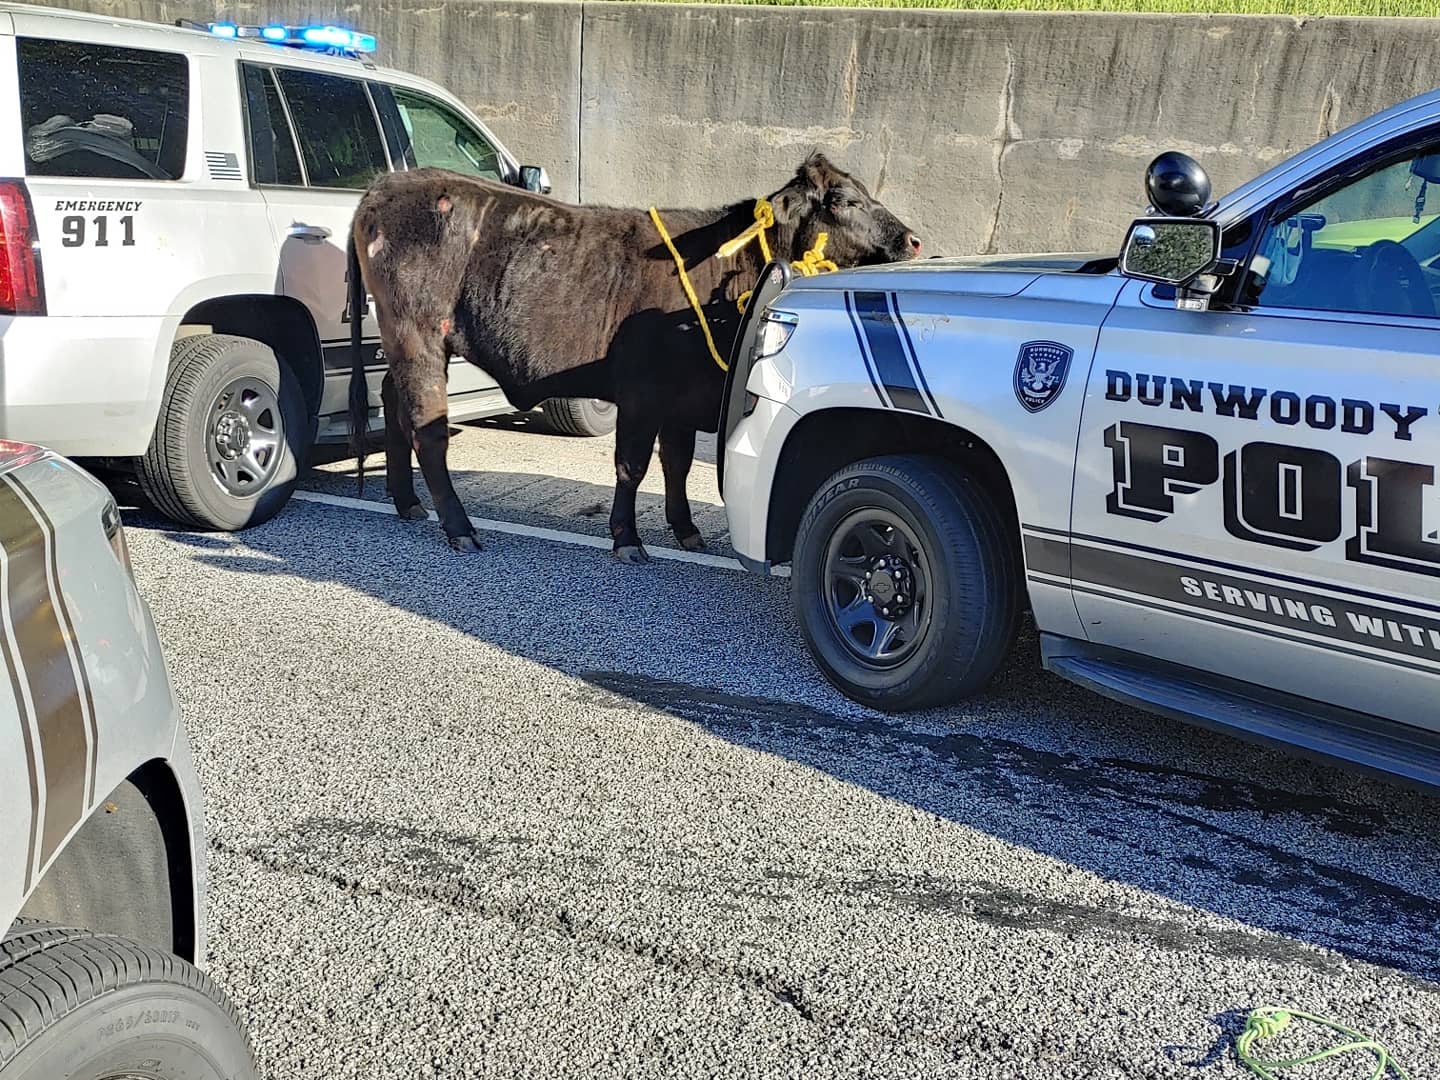 Police in Dunwoody, Georgia, said they were called to the interstate, which runs west of Atlanta, that morning to reports that a cow was running on the road